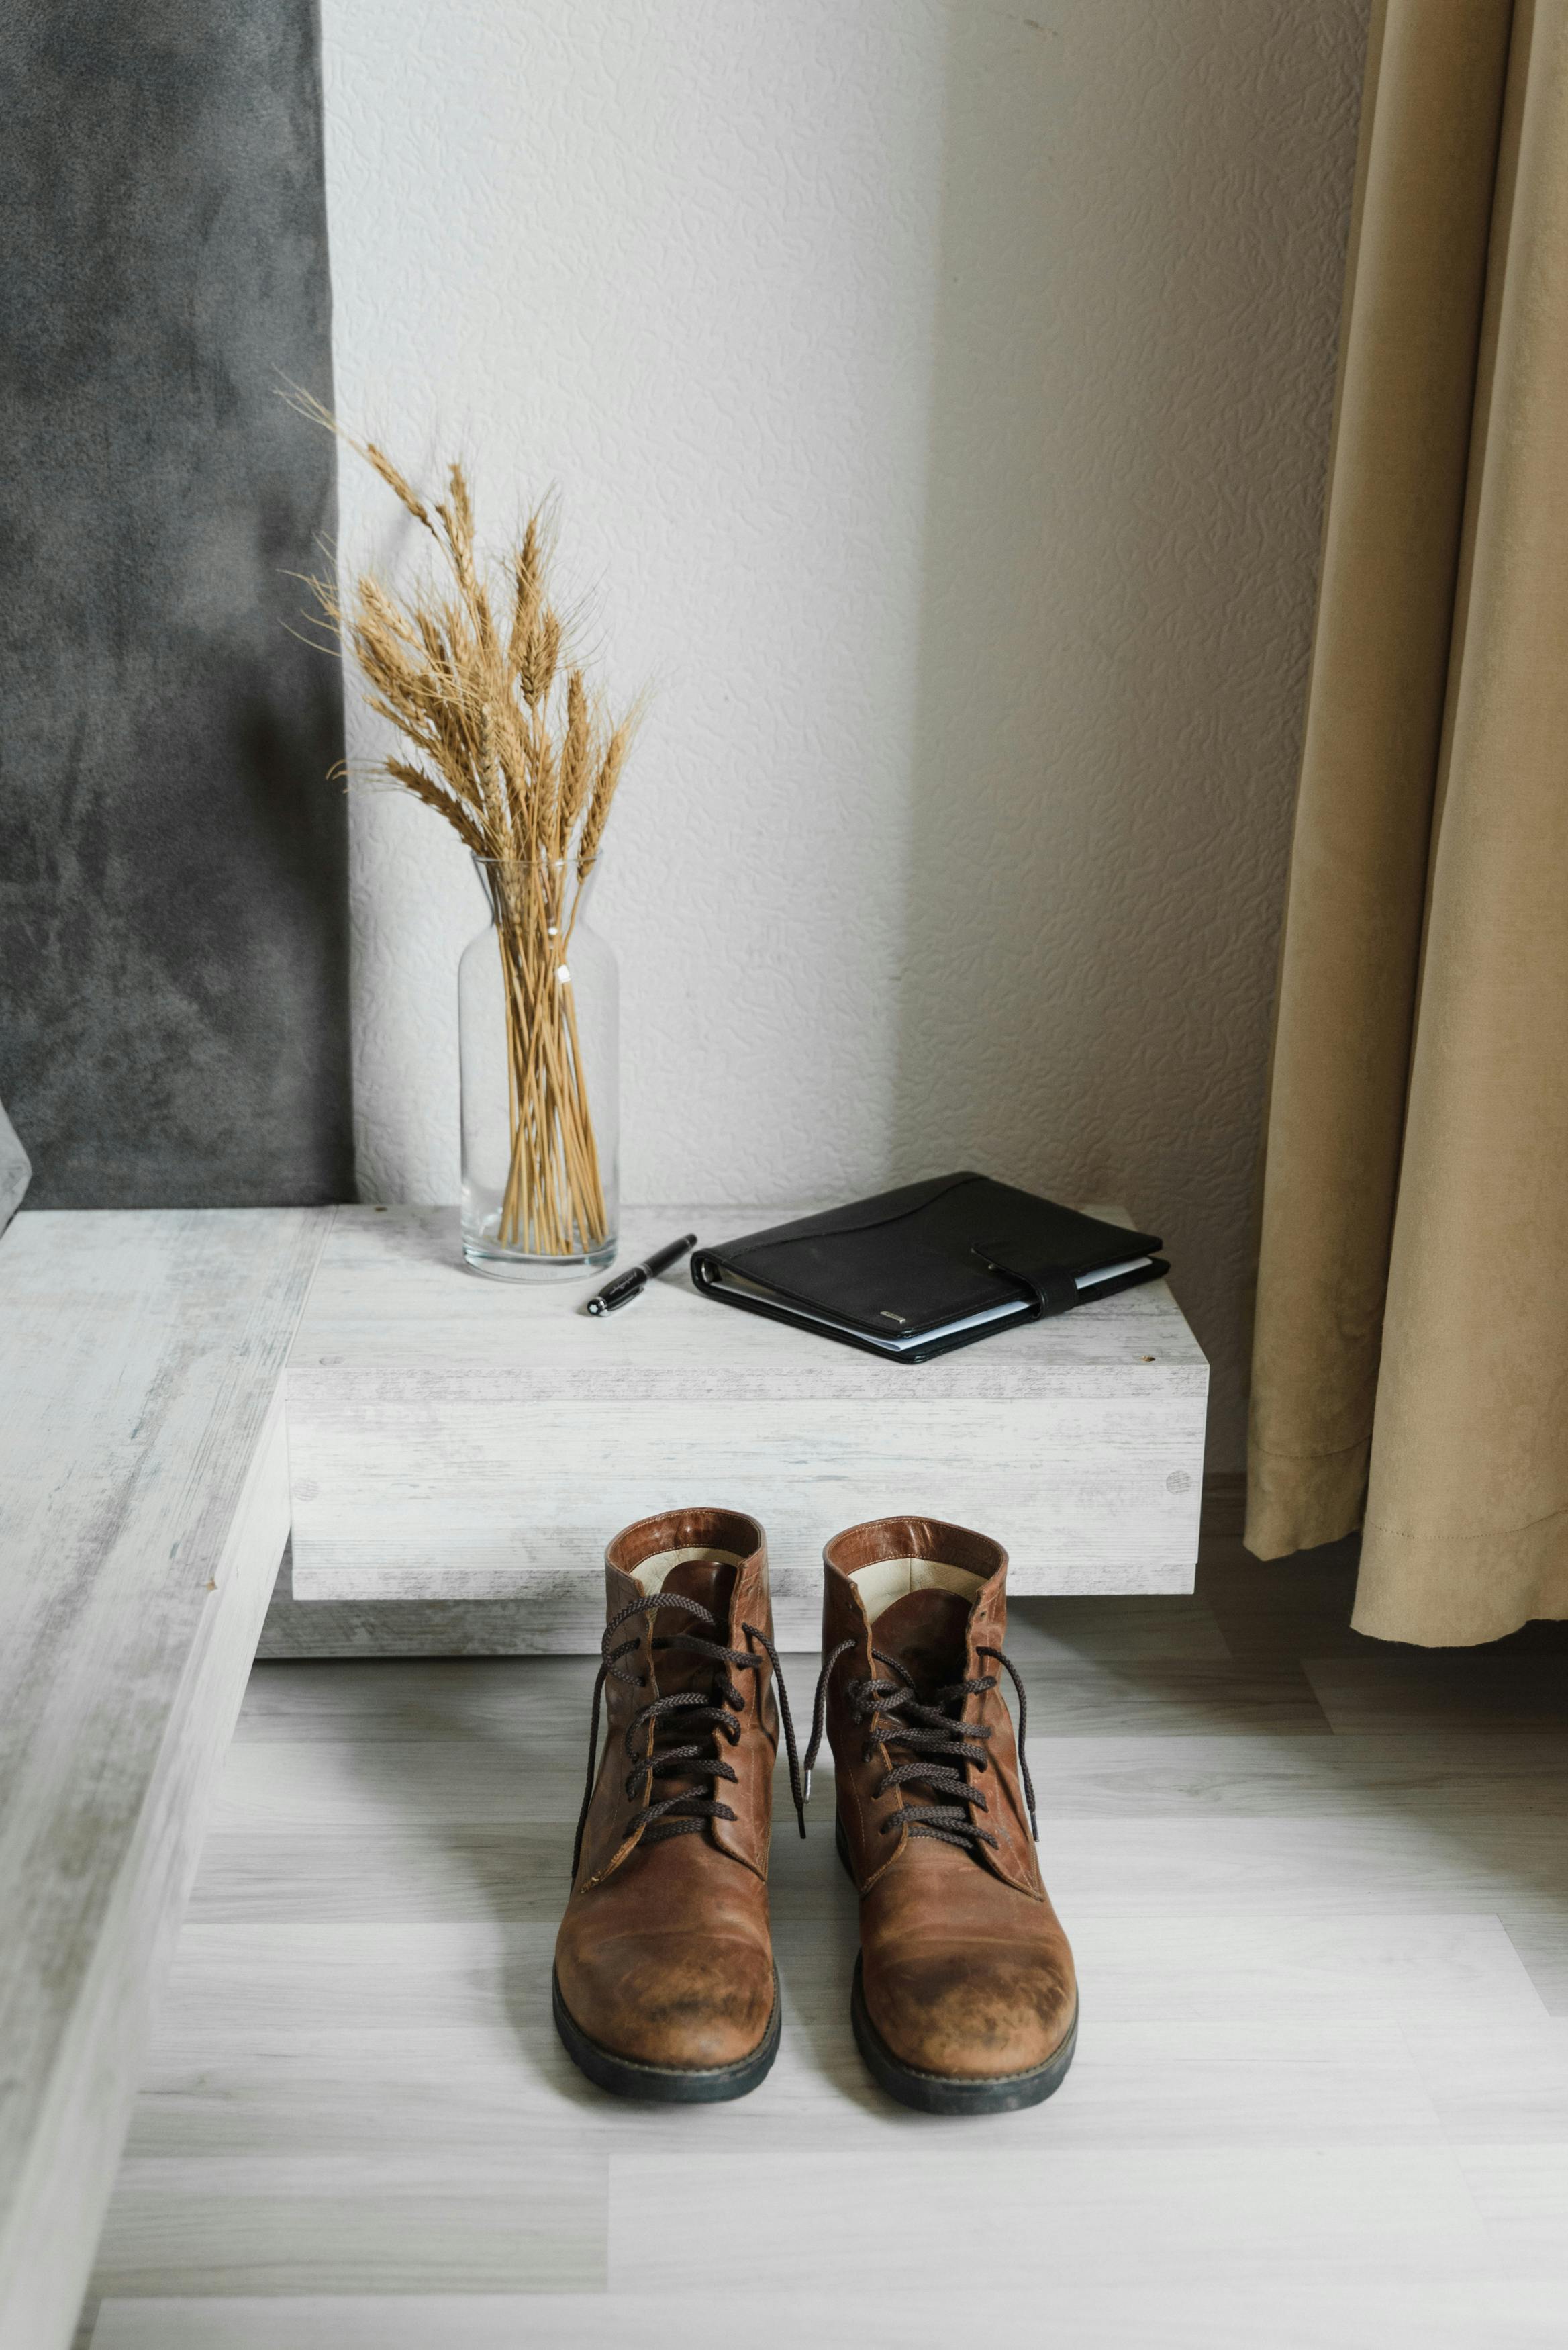 brown leather boots beside black laptop computer